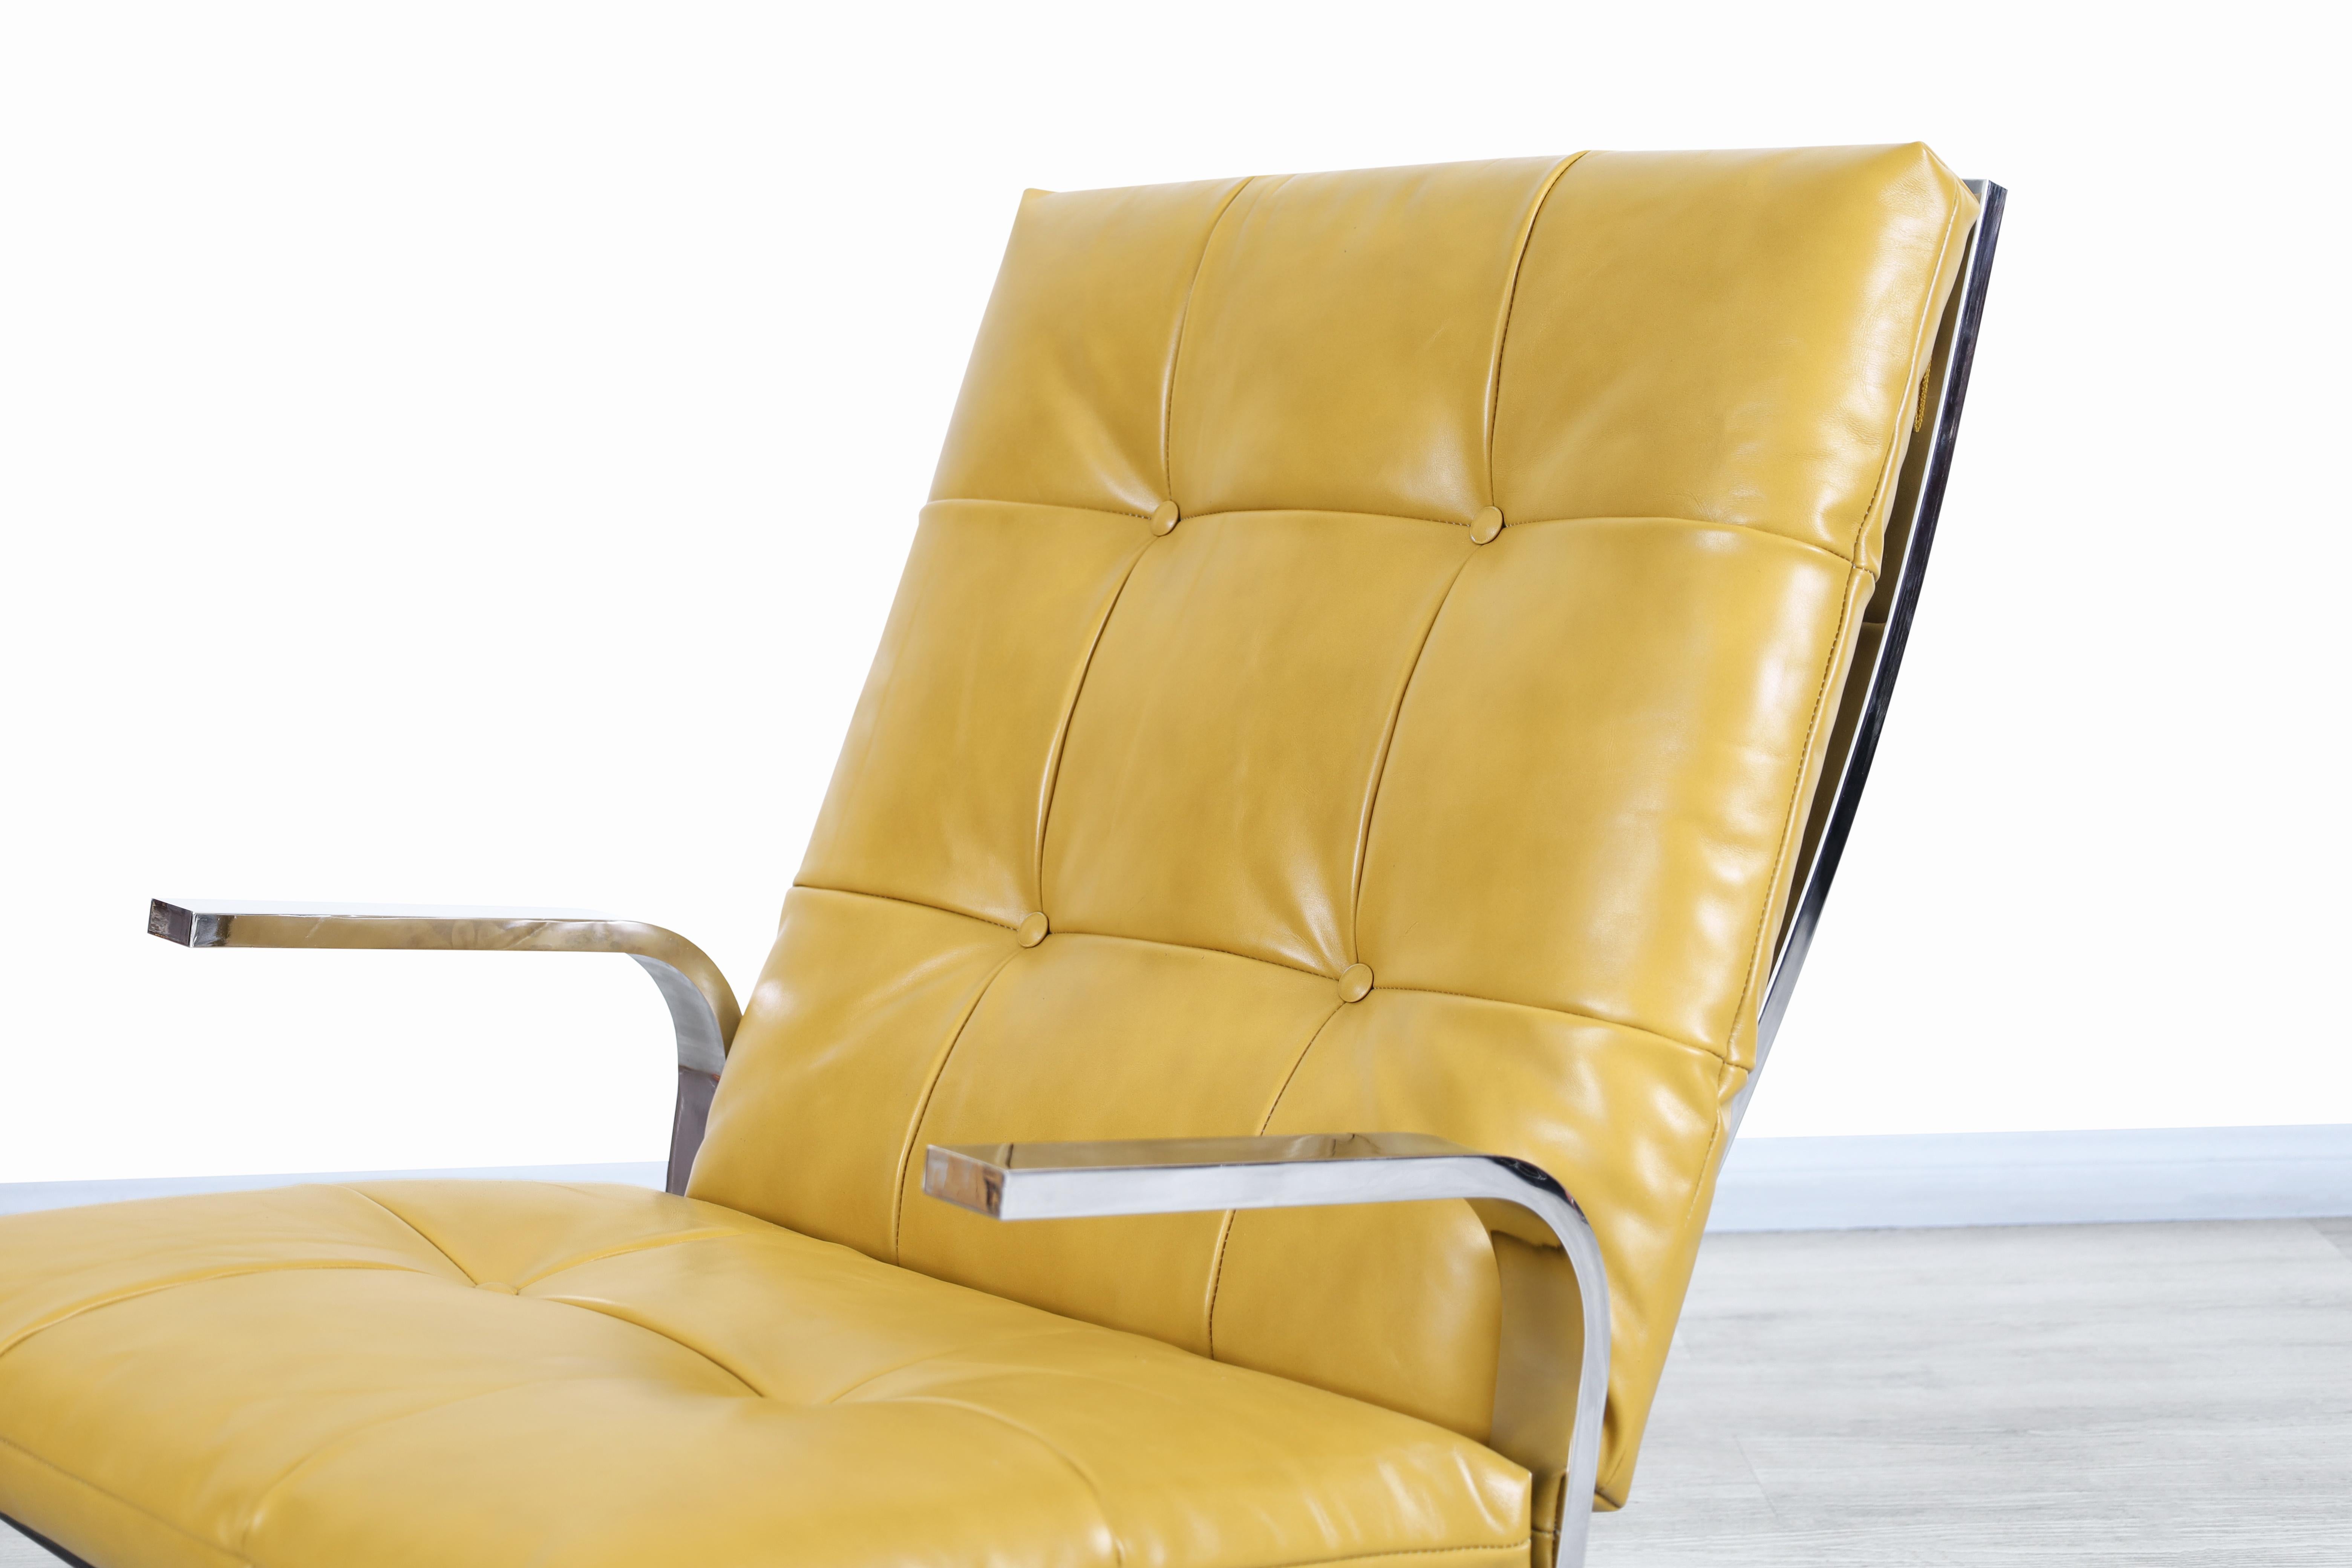 Late 20th Century Midcentury Chrome and Leather Lounge Chair and Ottoman For Sale